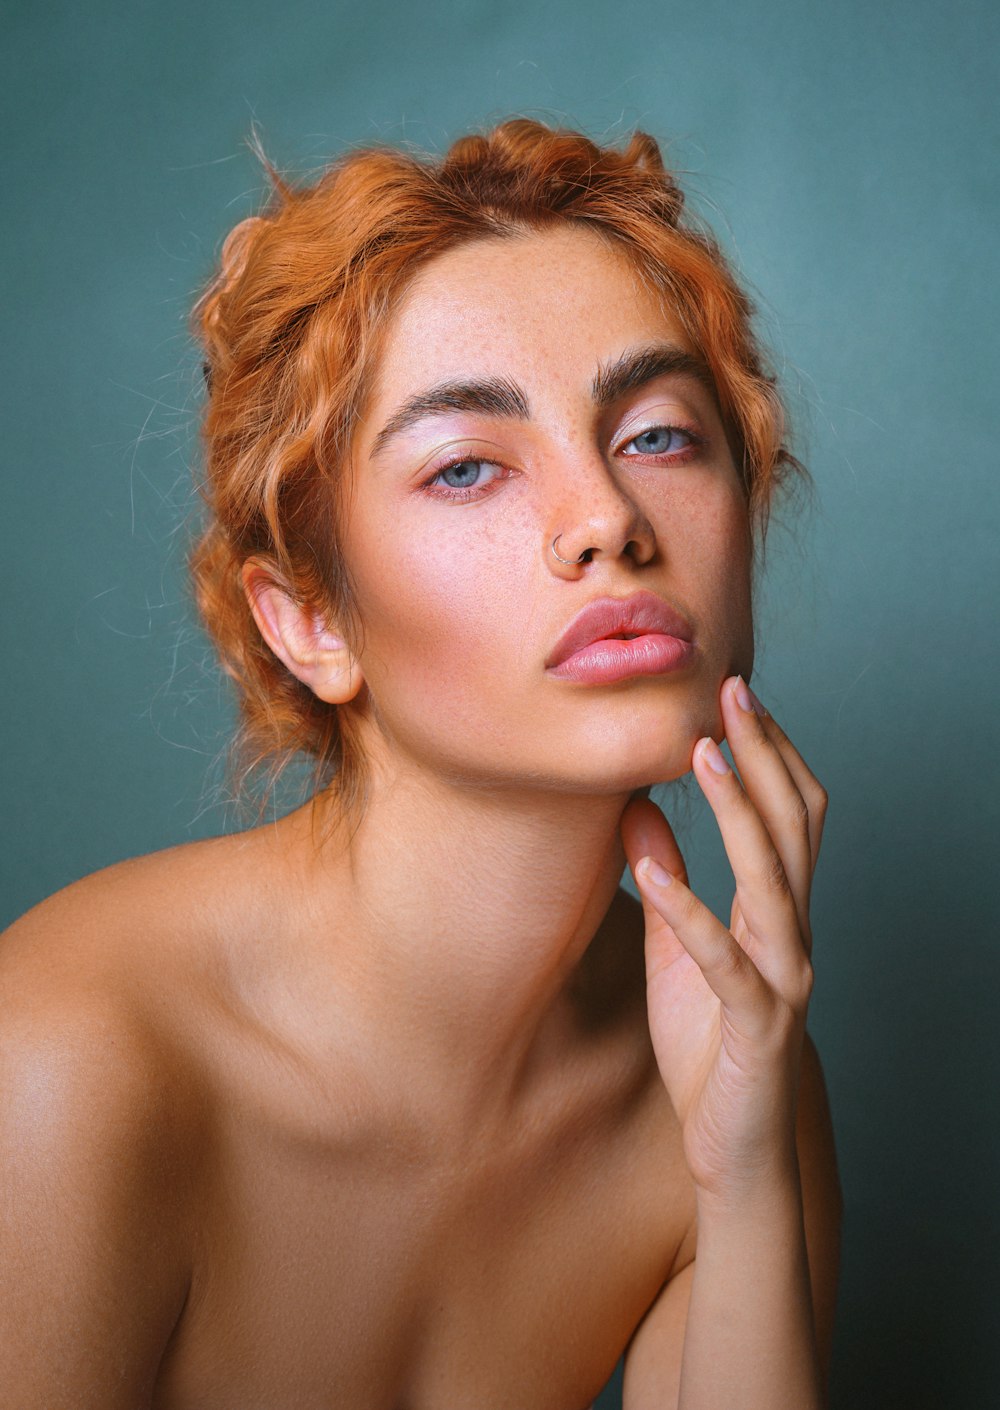 a woman with freckled hair is posing for a picture